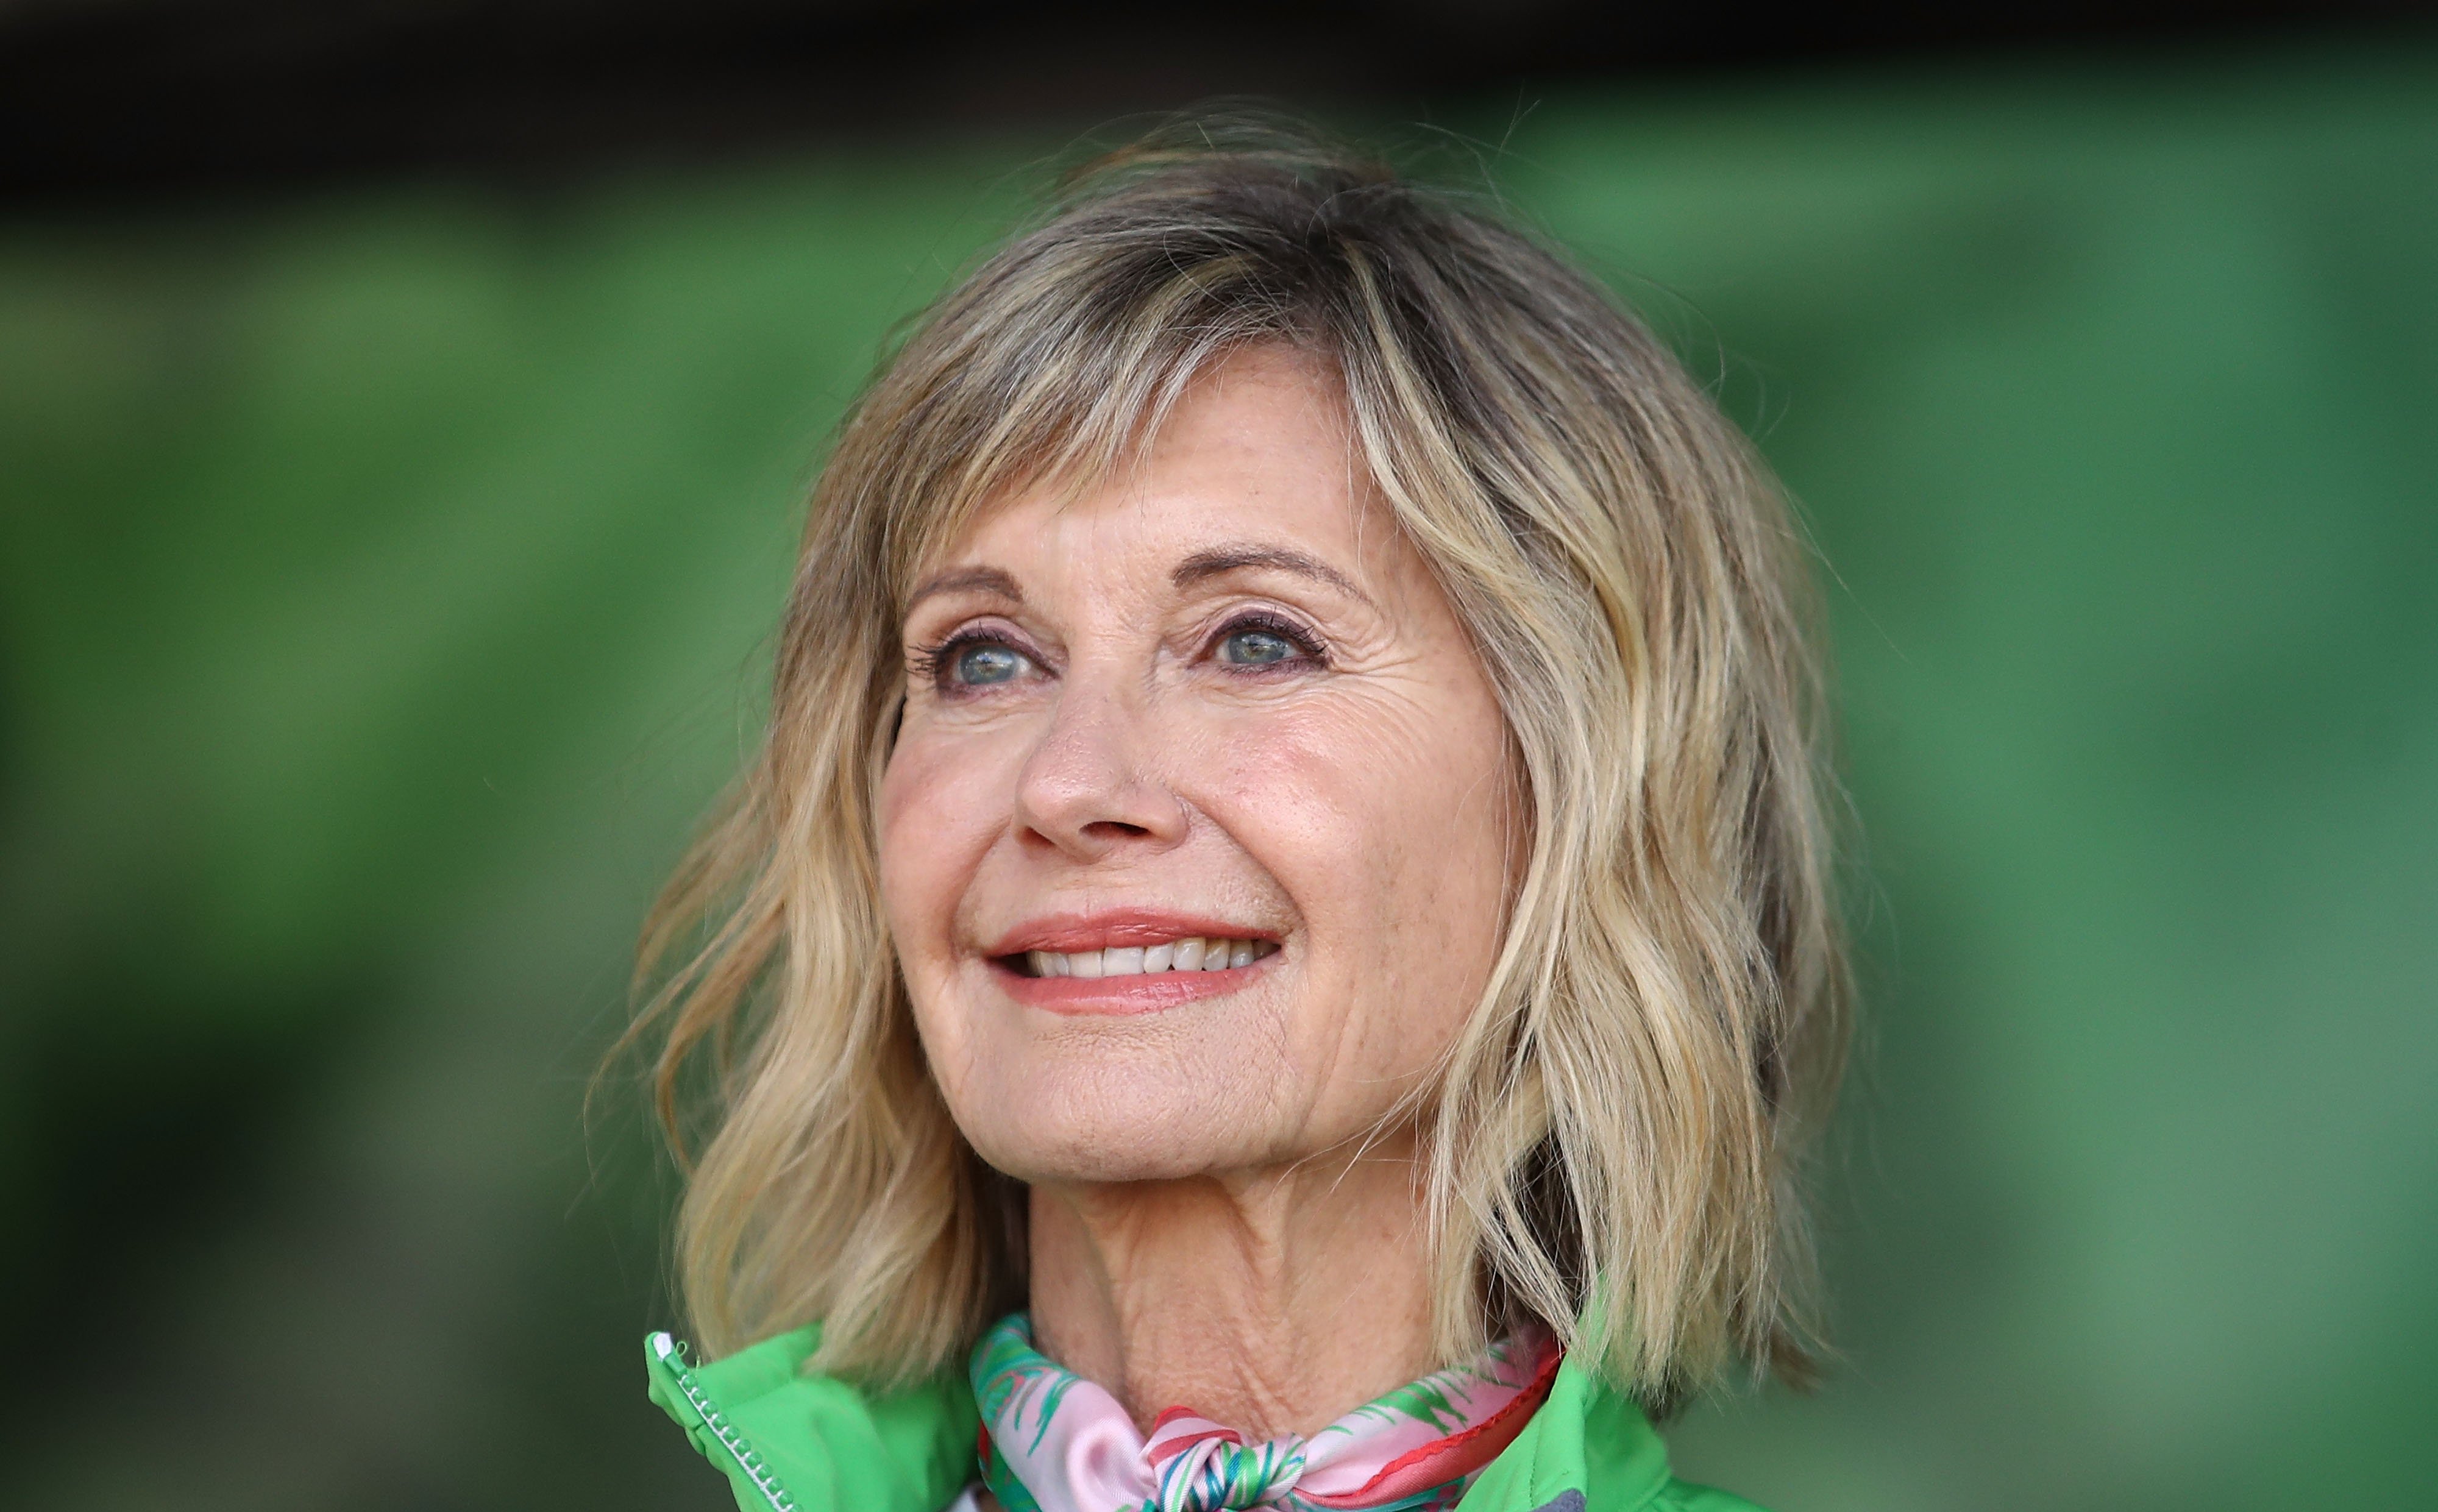 Olivia Newton-John at the annual Wellness Walk and Research Run on September 16, 2018 | Source: Getty Images